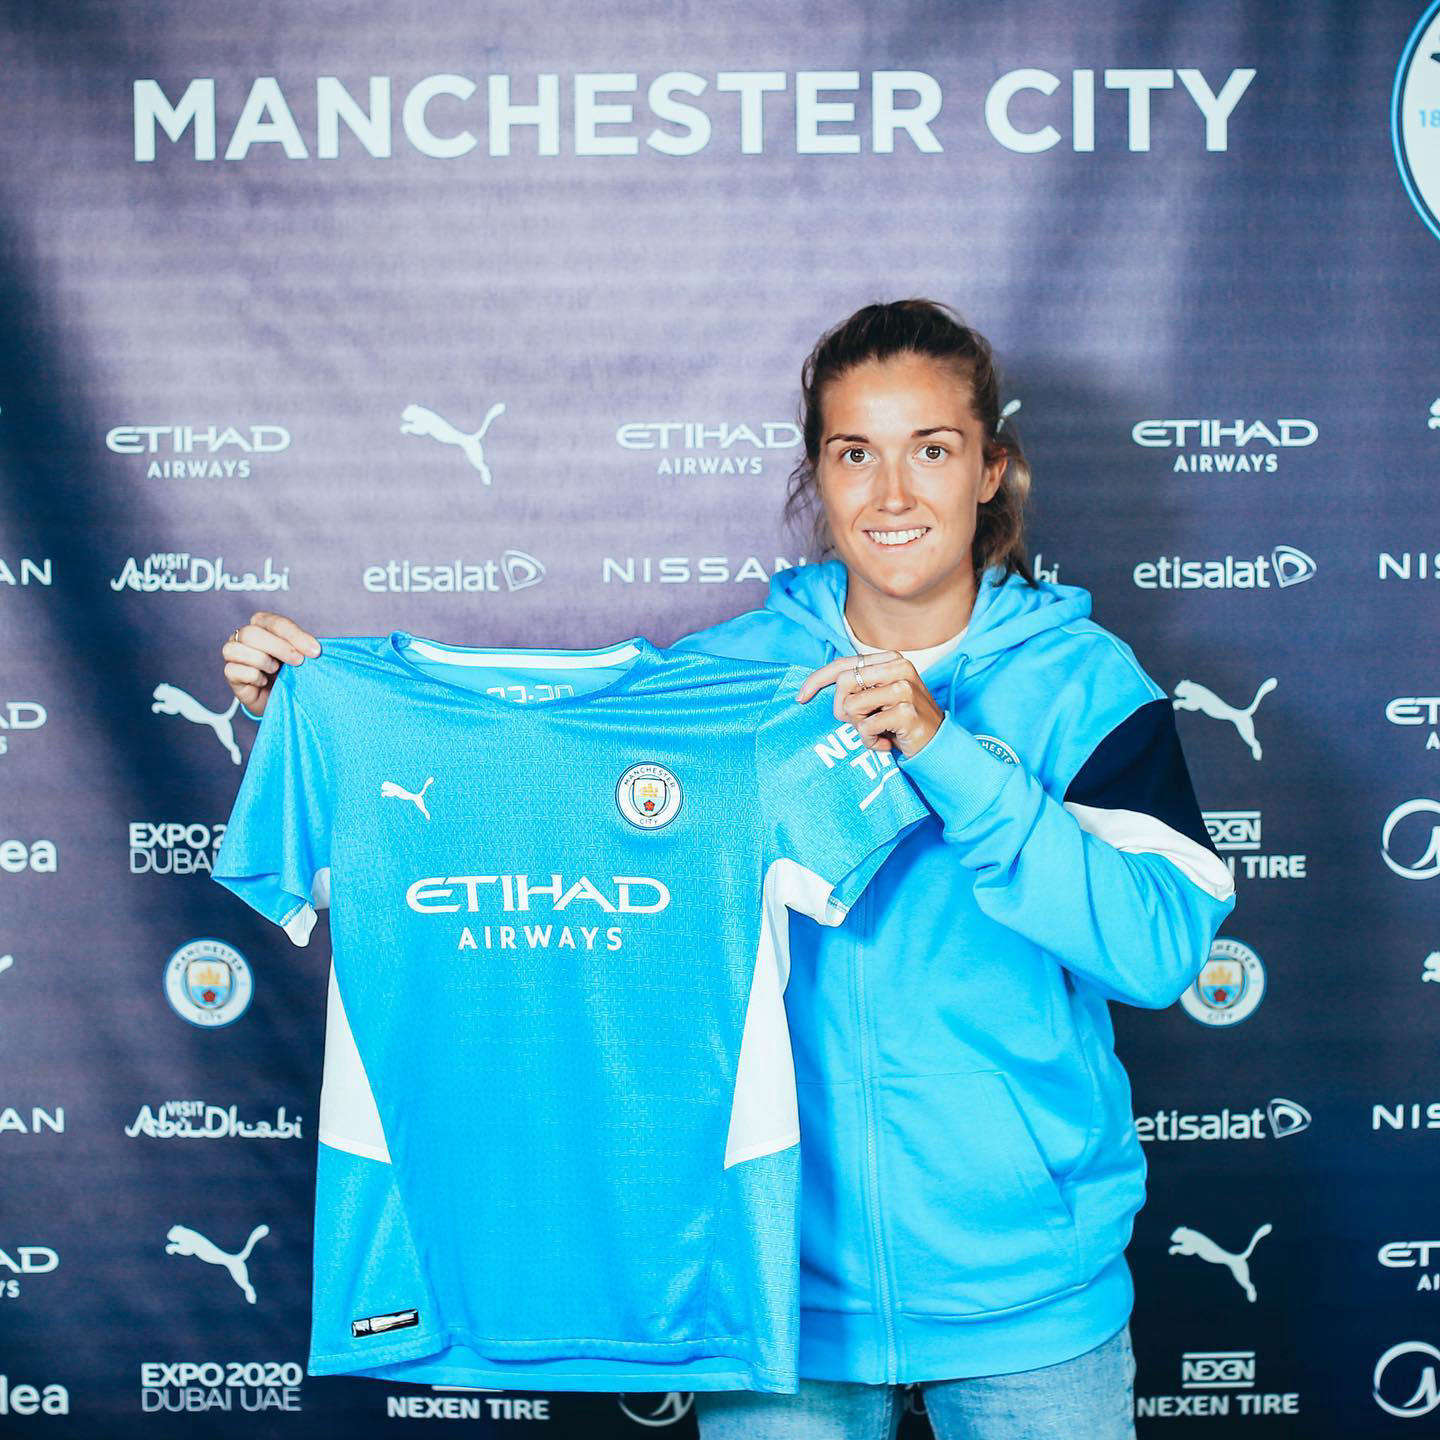 image  1 Manchester City - This time last year, we signed #filippaangeldahl